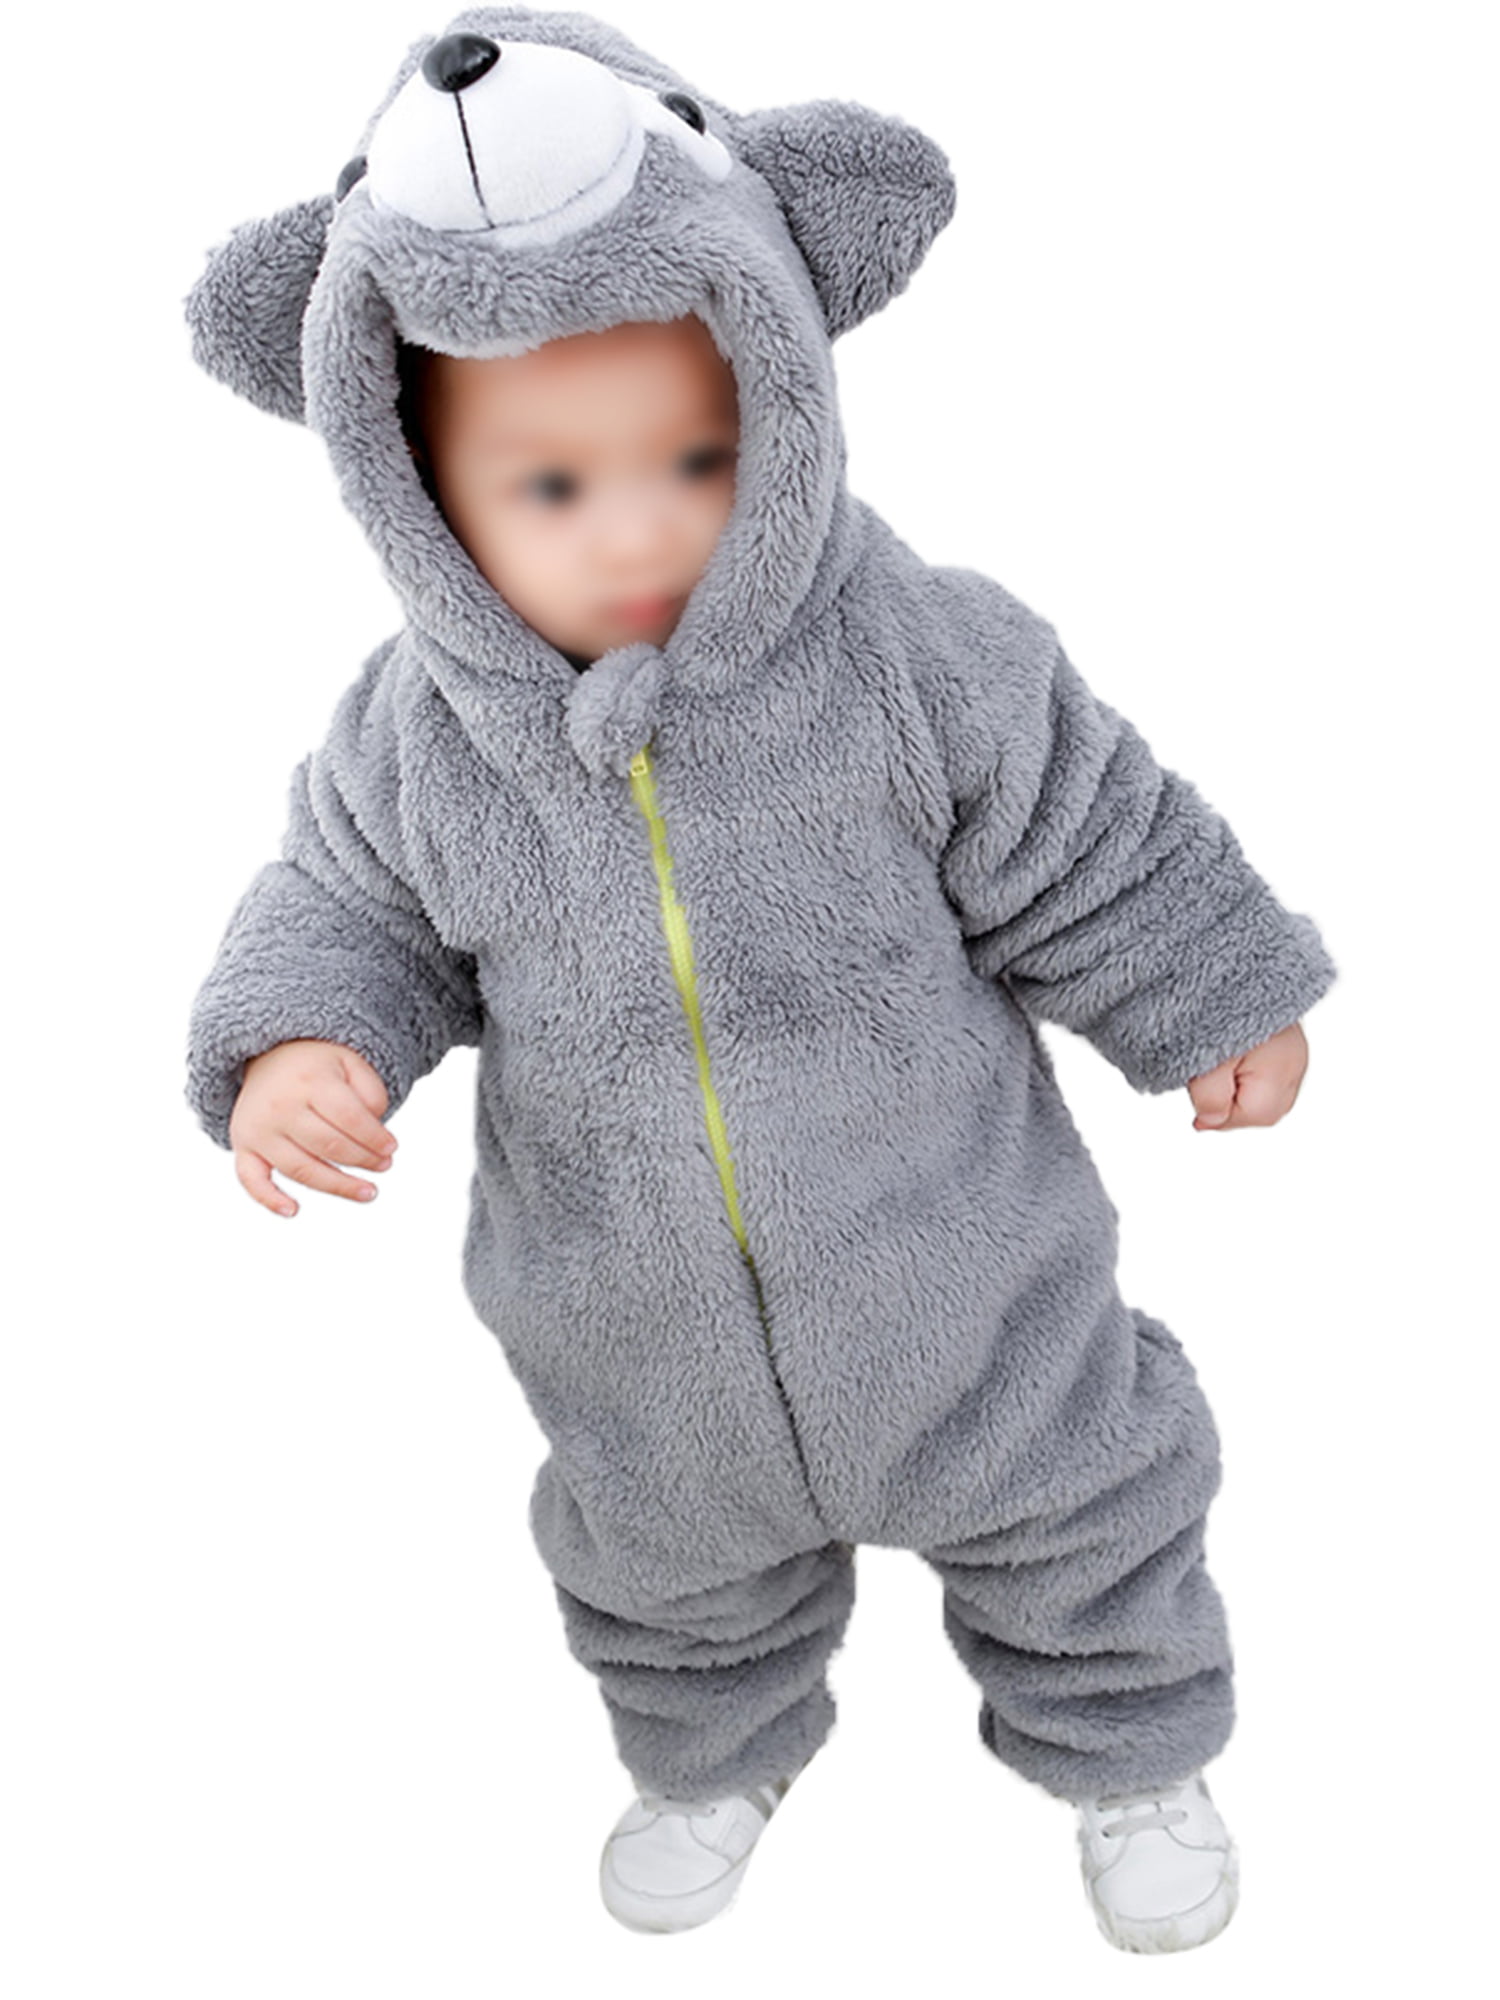 Jumpsuit Warm Clothes Baby Boy Girl Hooded Cartoon Lovely white Brown bear